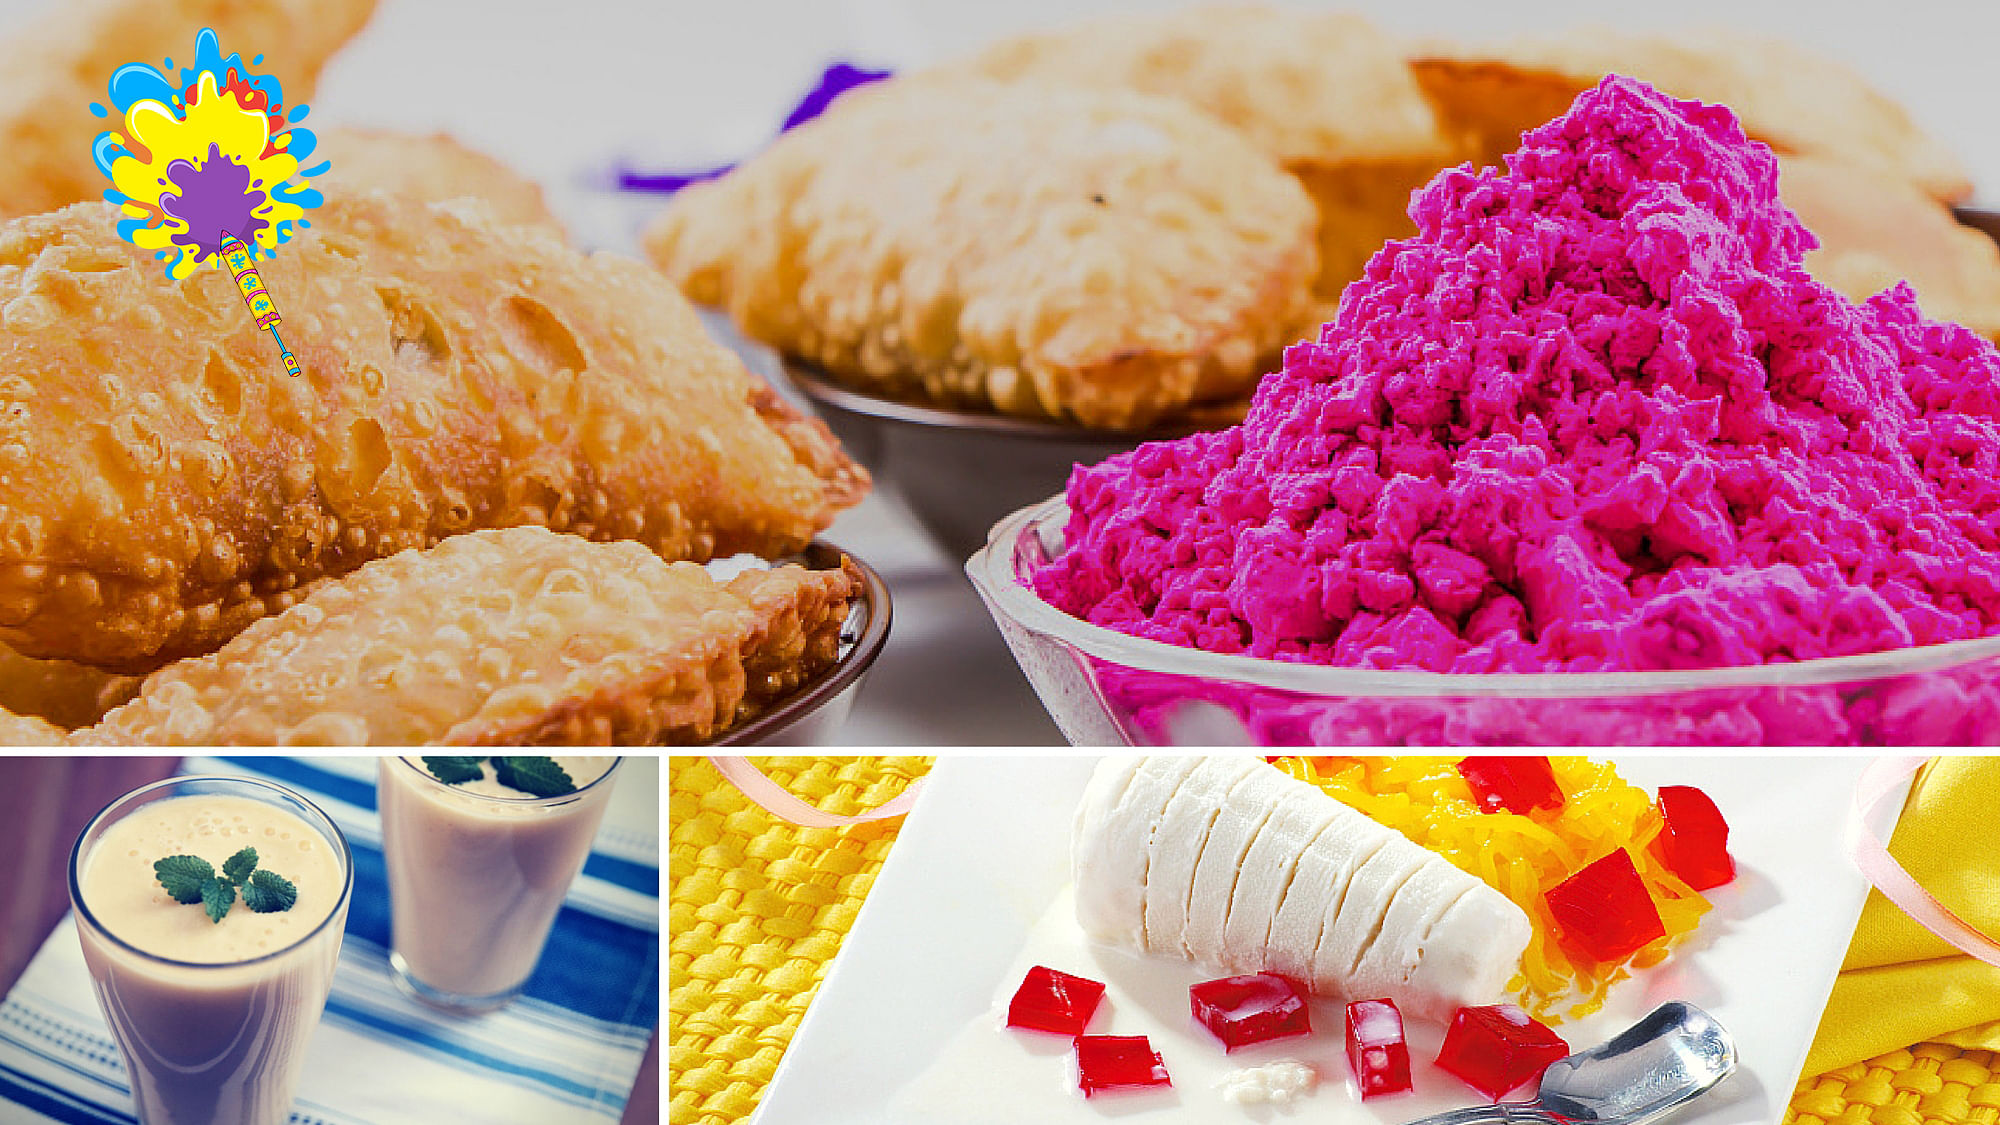 Gujiya, lassi and kulfi are some of the desserts you can whip up this Holi with bhang! (Photo: iStock; Images altered by <b>The Quint</b>)